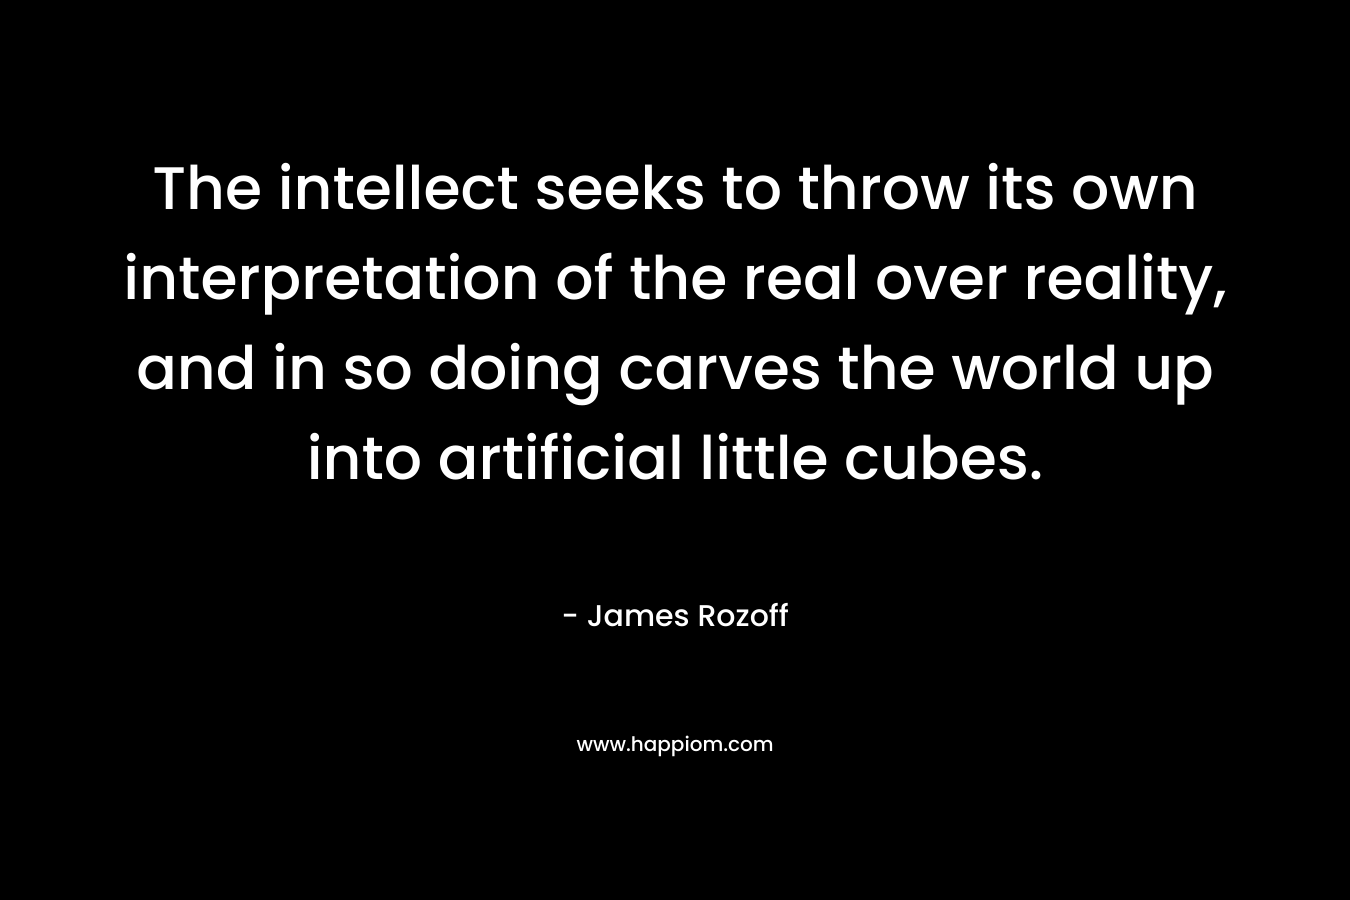 The intellect seeks to throw its own interpretation of the real over reality, and in so doing carves the world up into artificial little cubes. – James Rozoff